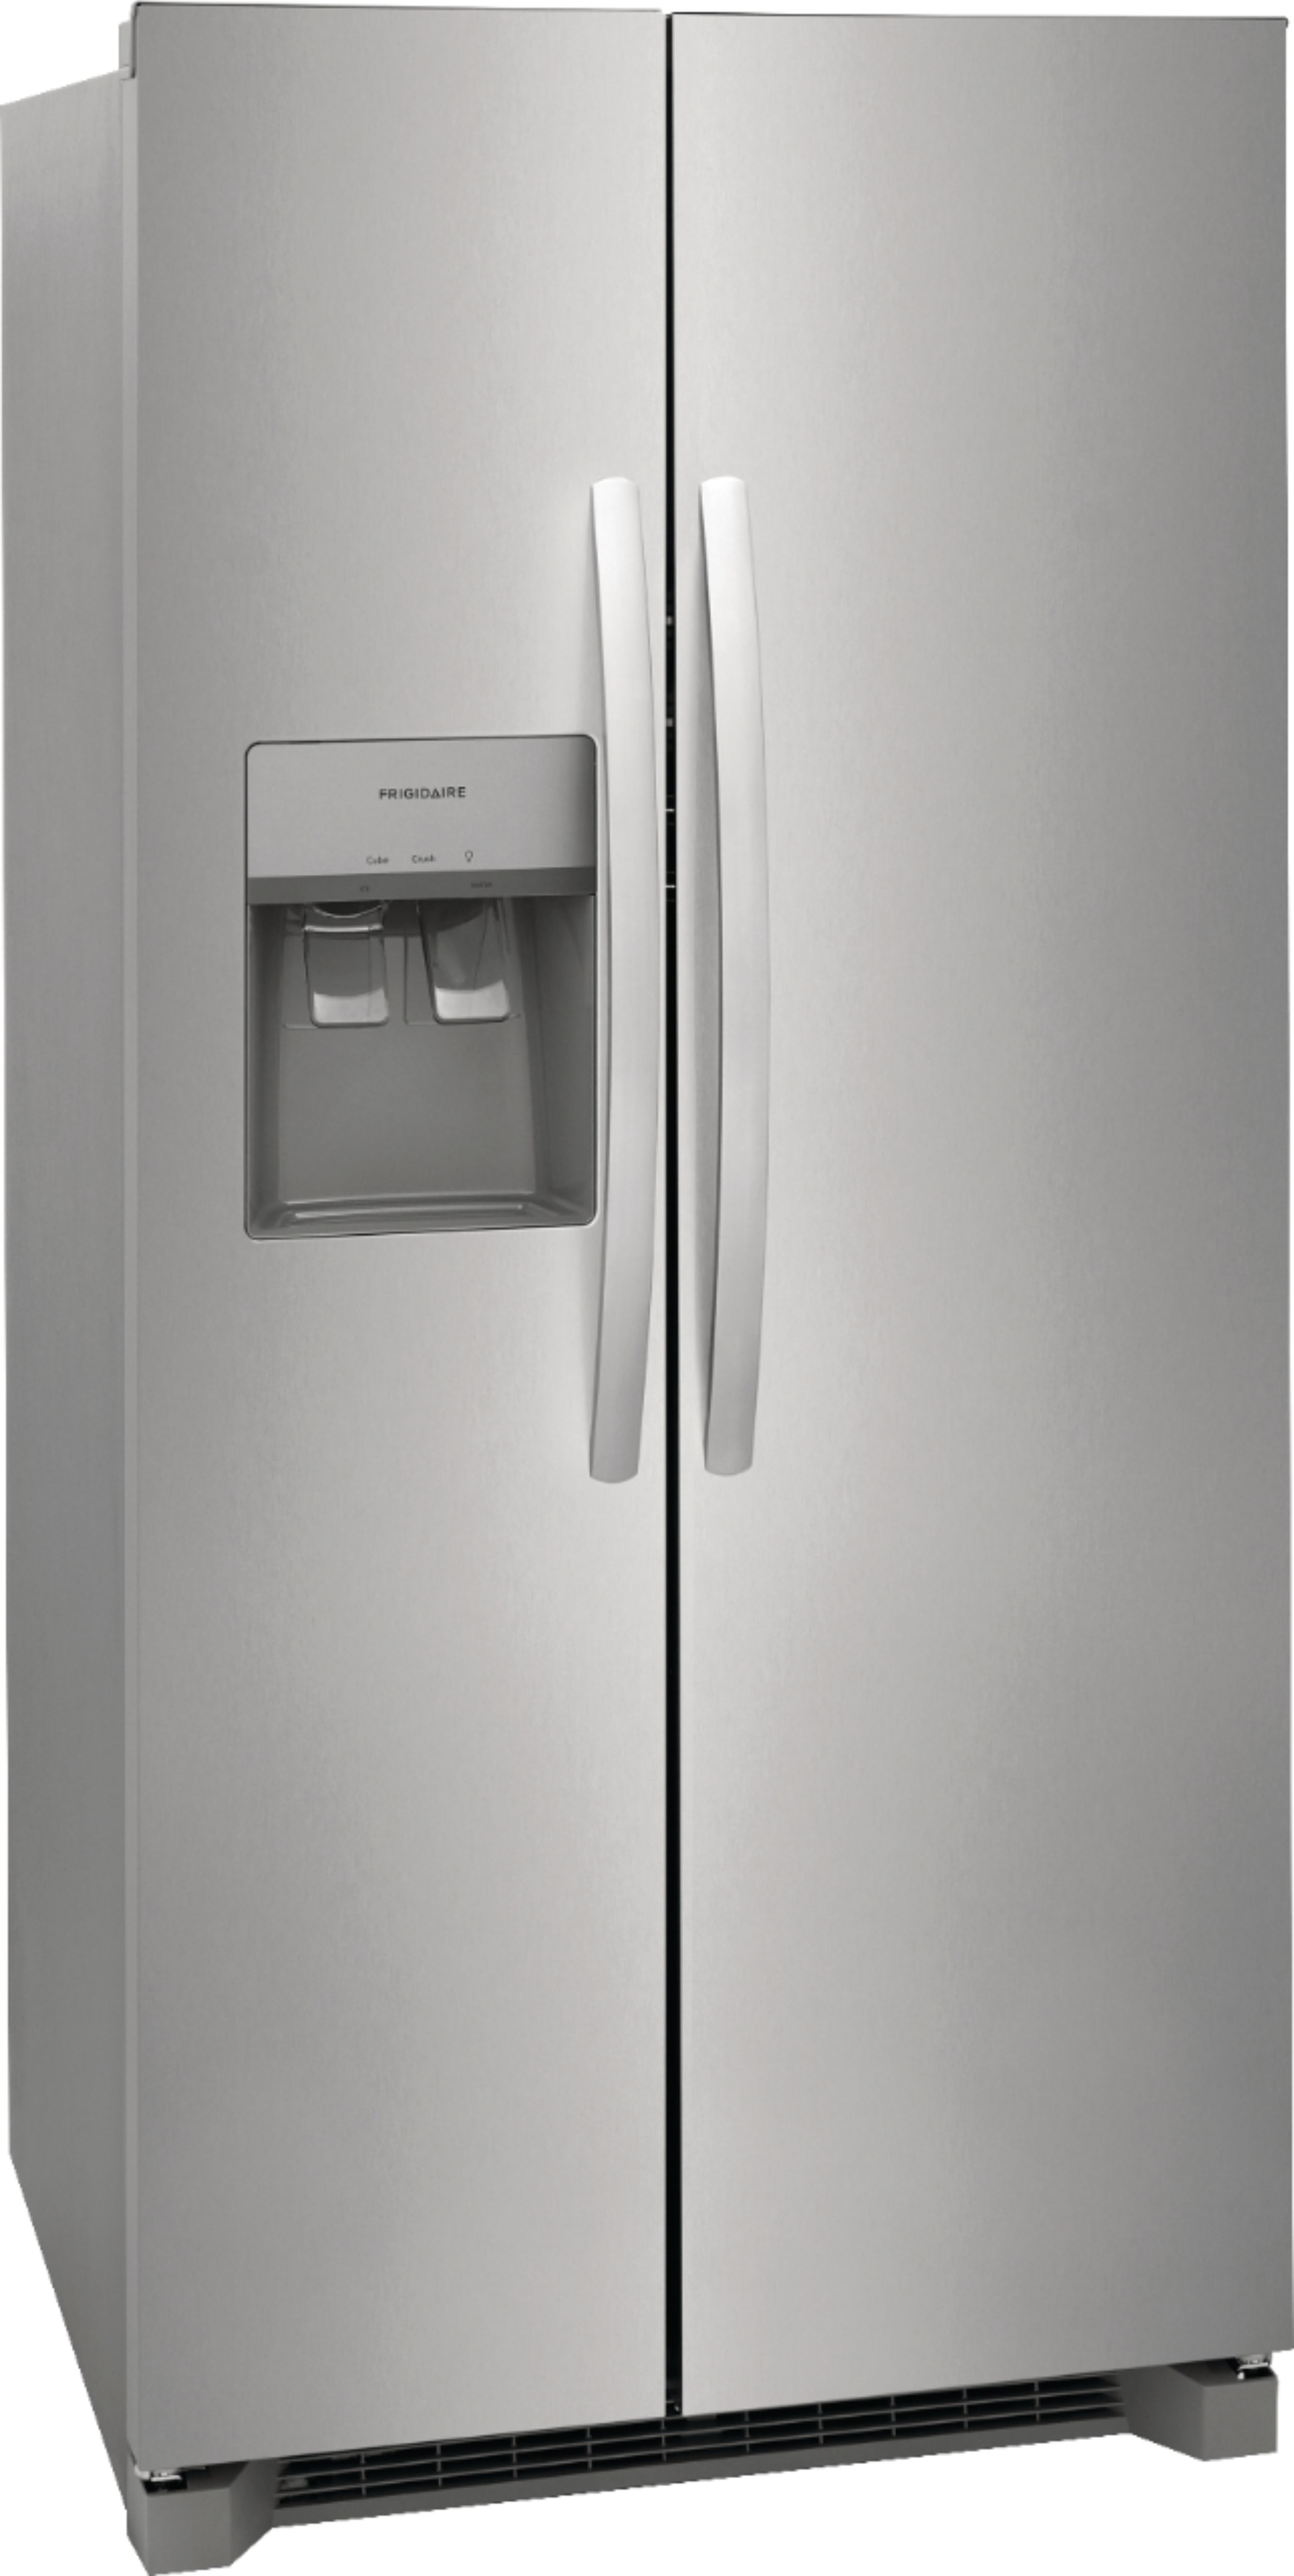 Angle View: Frigidaire - 22.3 Cu. Ft. Side-by-Side Refrigerator - Stainless steel